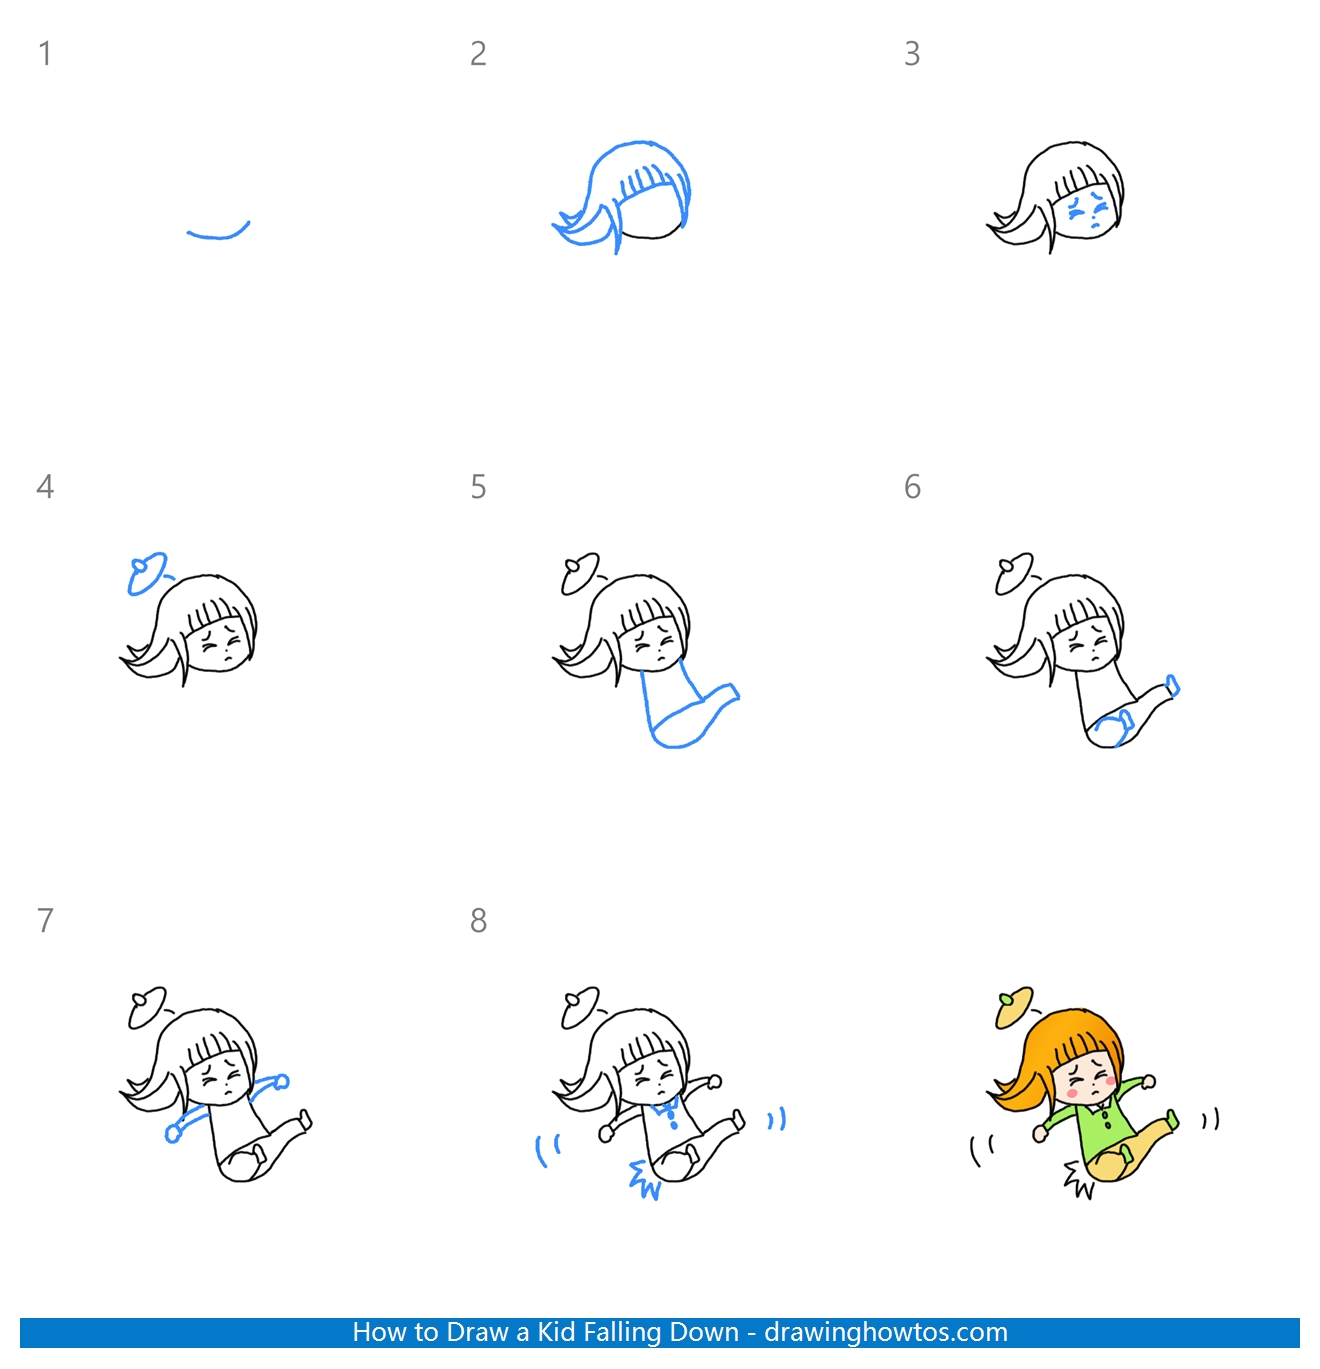 How to Draw a Kid Falling Down Step by Step